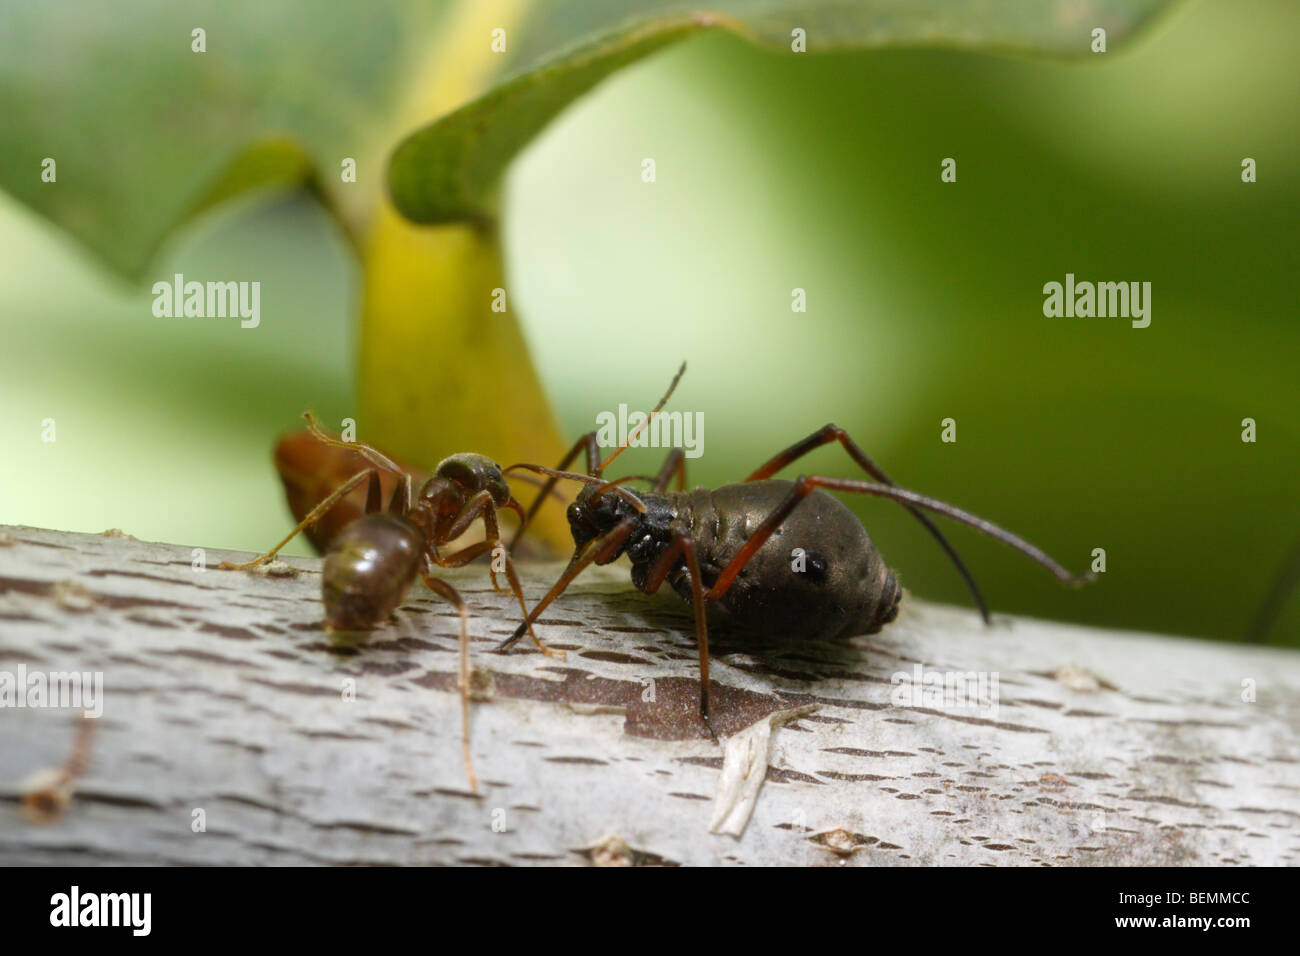 Lachnus roboris, an aphid that feeds on oak. A Black Garden Ant (Lasius niger) is tending to the aphid. Stock Photo